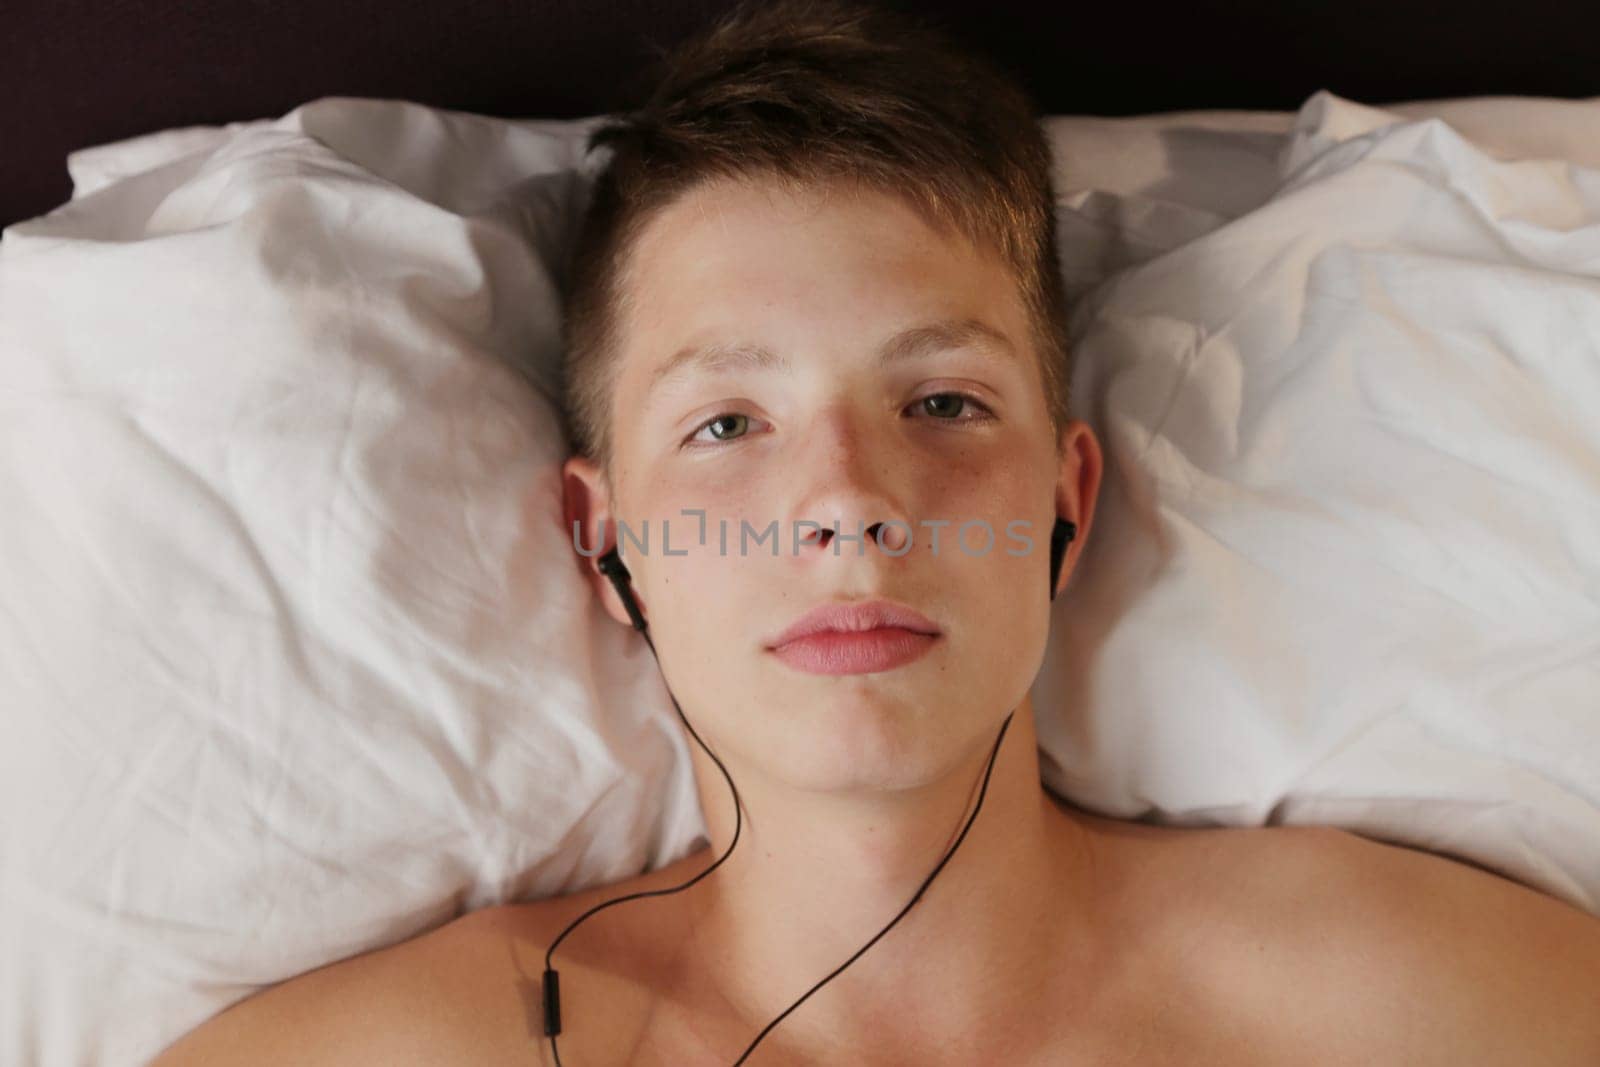 Head of a boy in headphones on a white pillow.